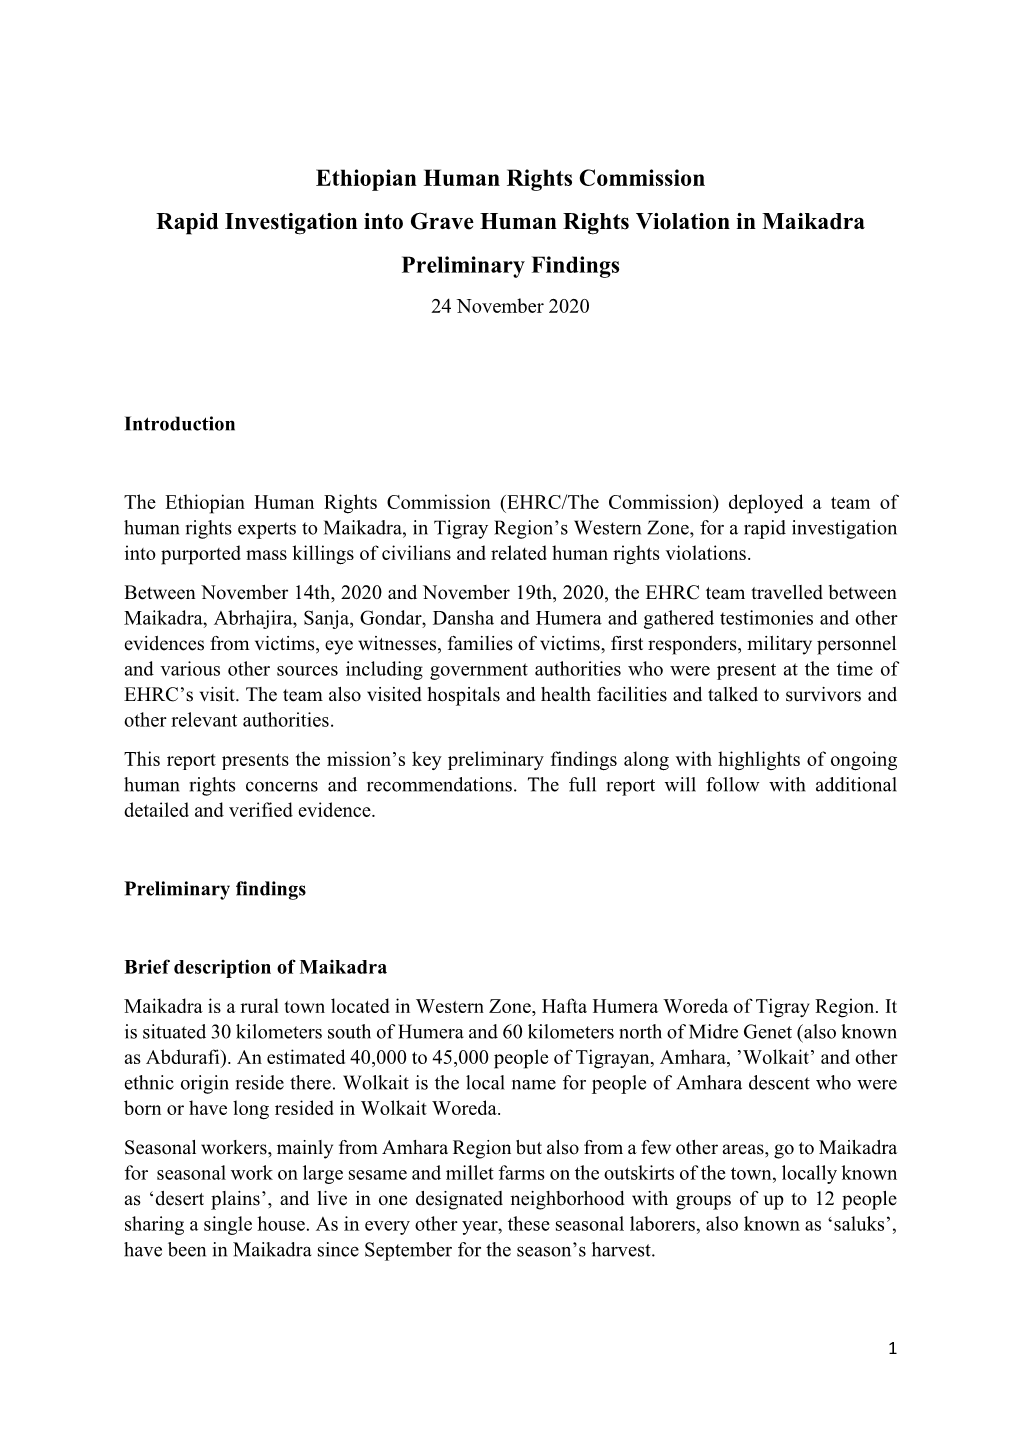 Ethiopian Human Rights Commission Rapid Investigation Into Grave Human Rights Violation in Maikadra Preliminary Findings 24 November 2020